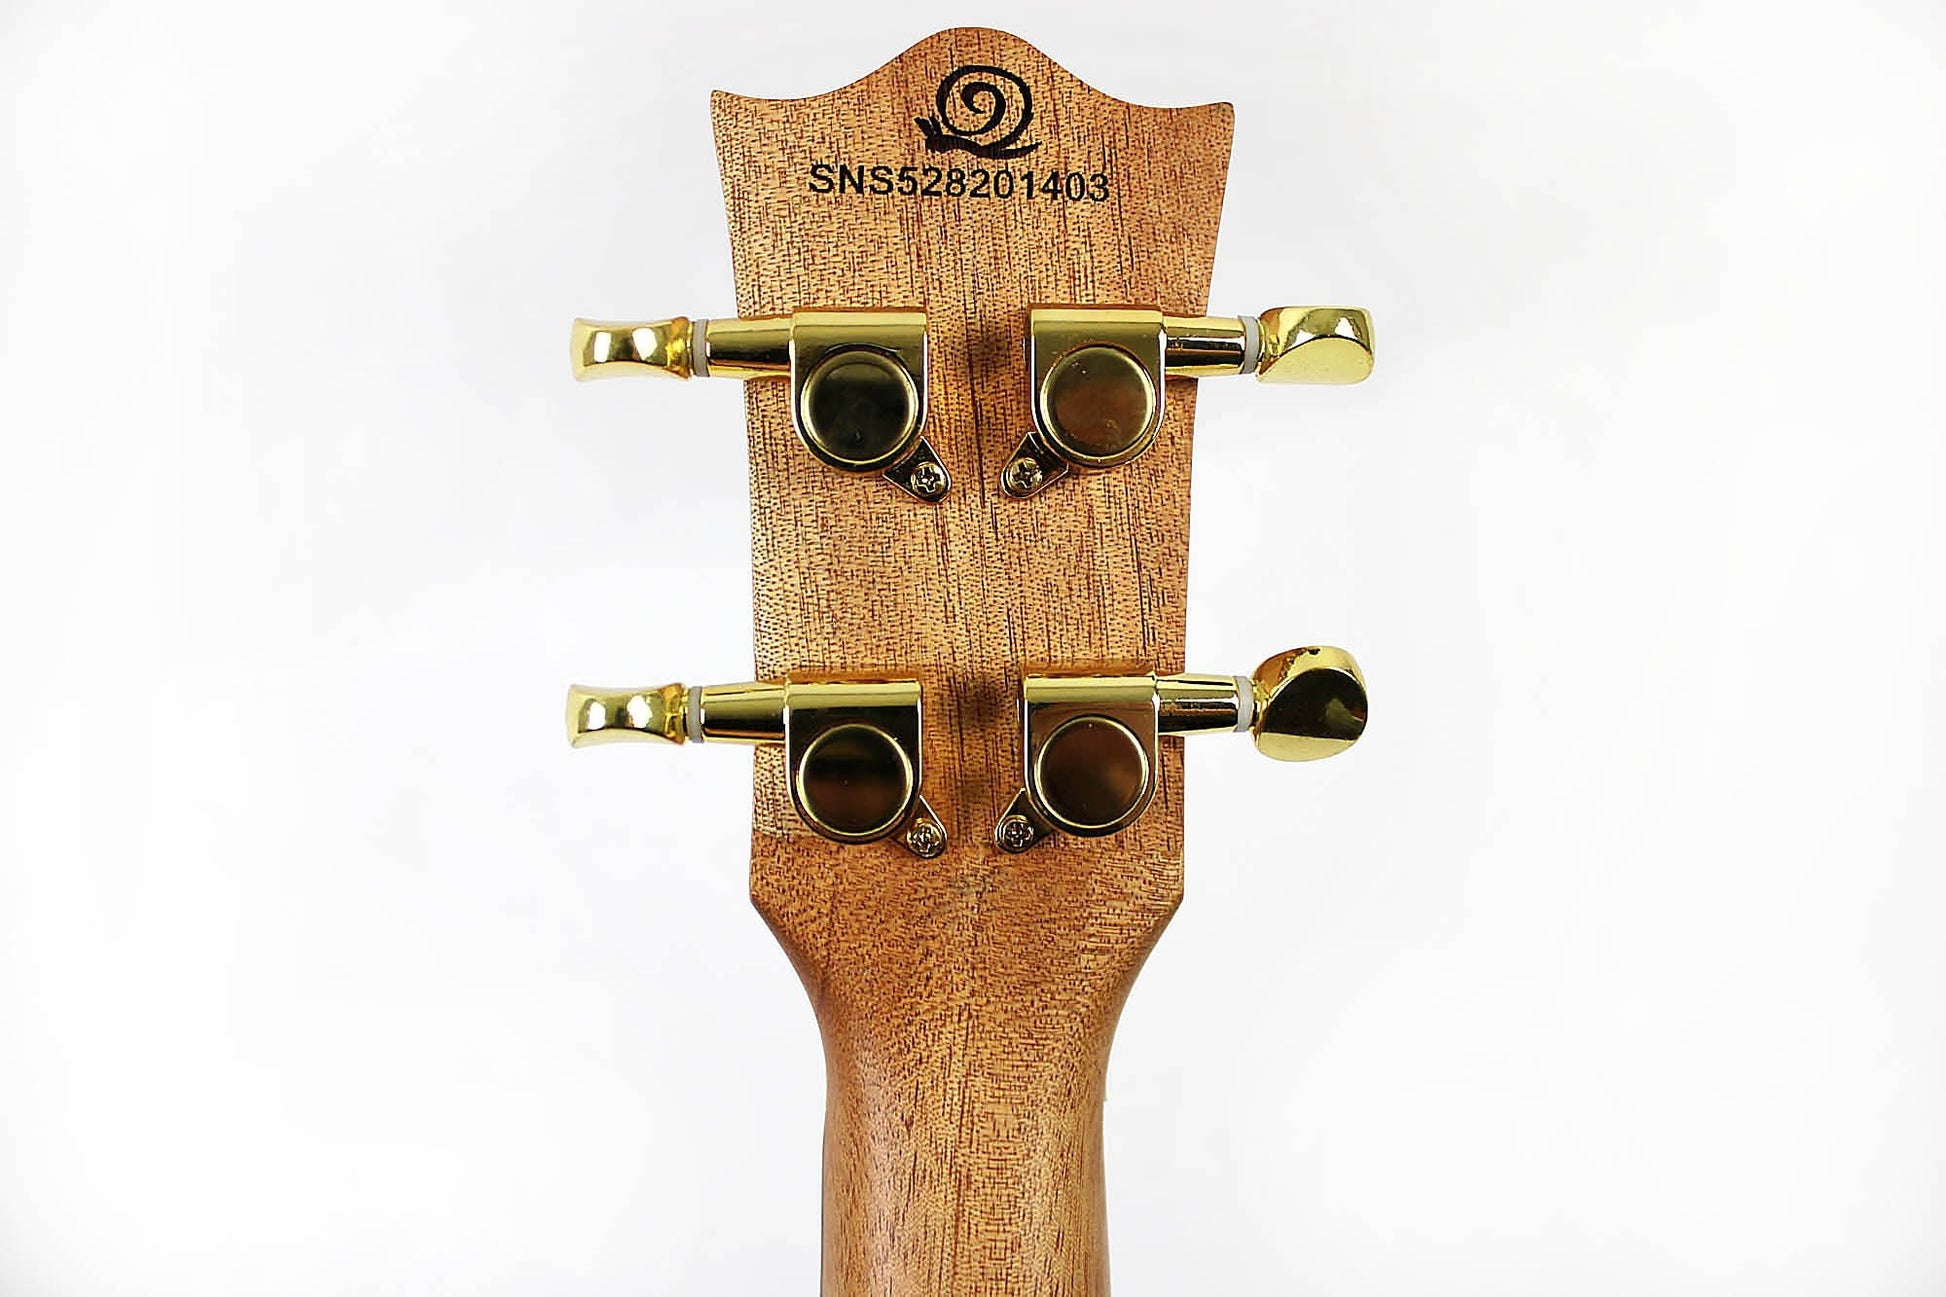 This is the back of the headstock of a Snail SNAILZEBUKT Zebrawood Tenor Ukulele.